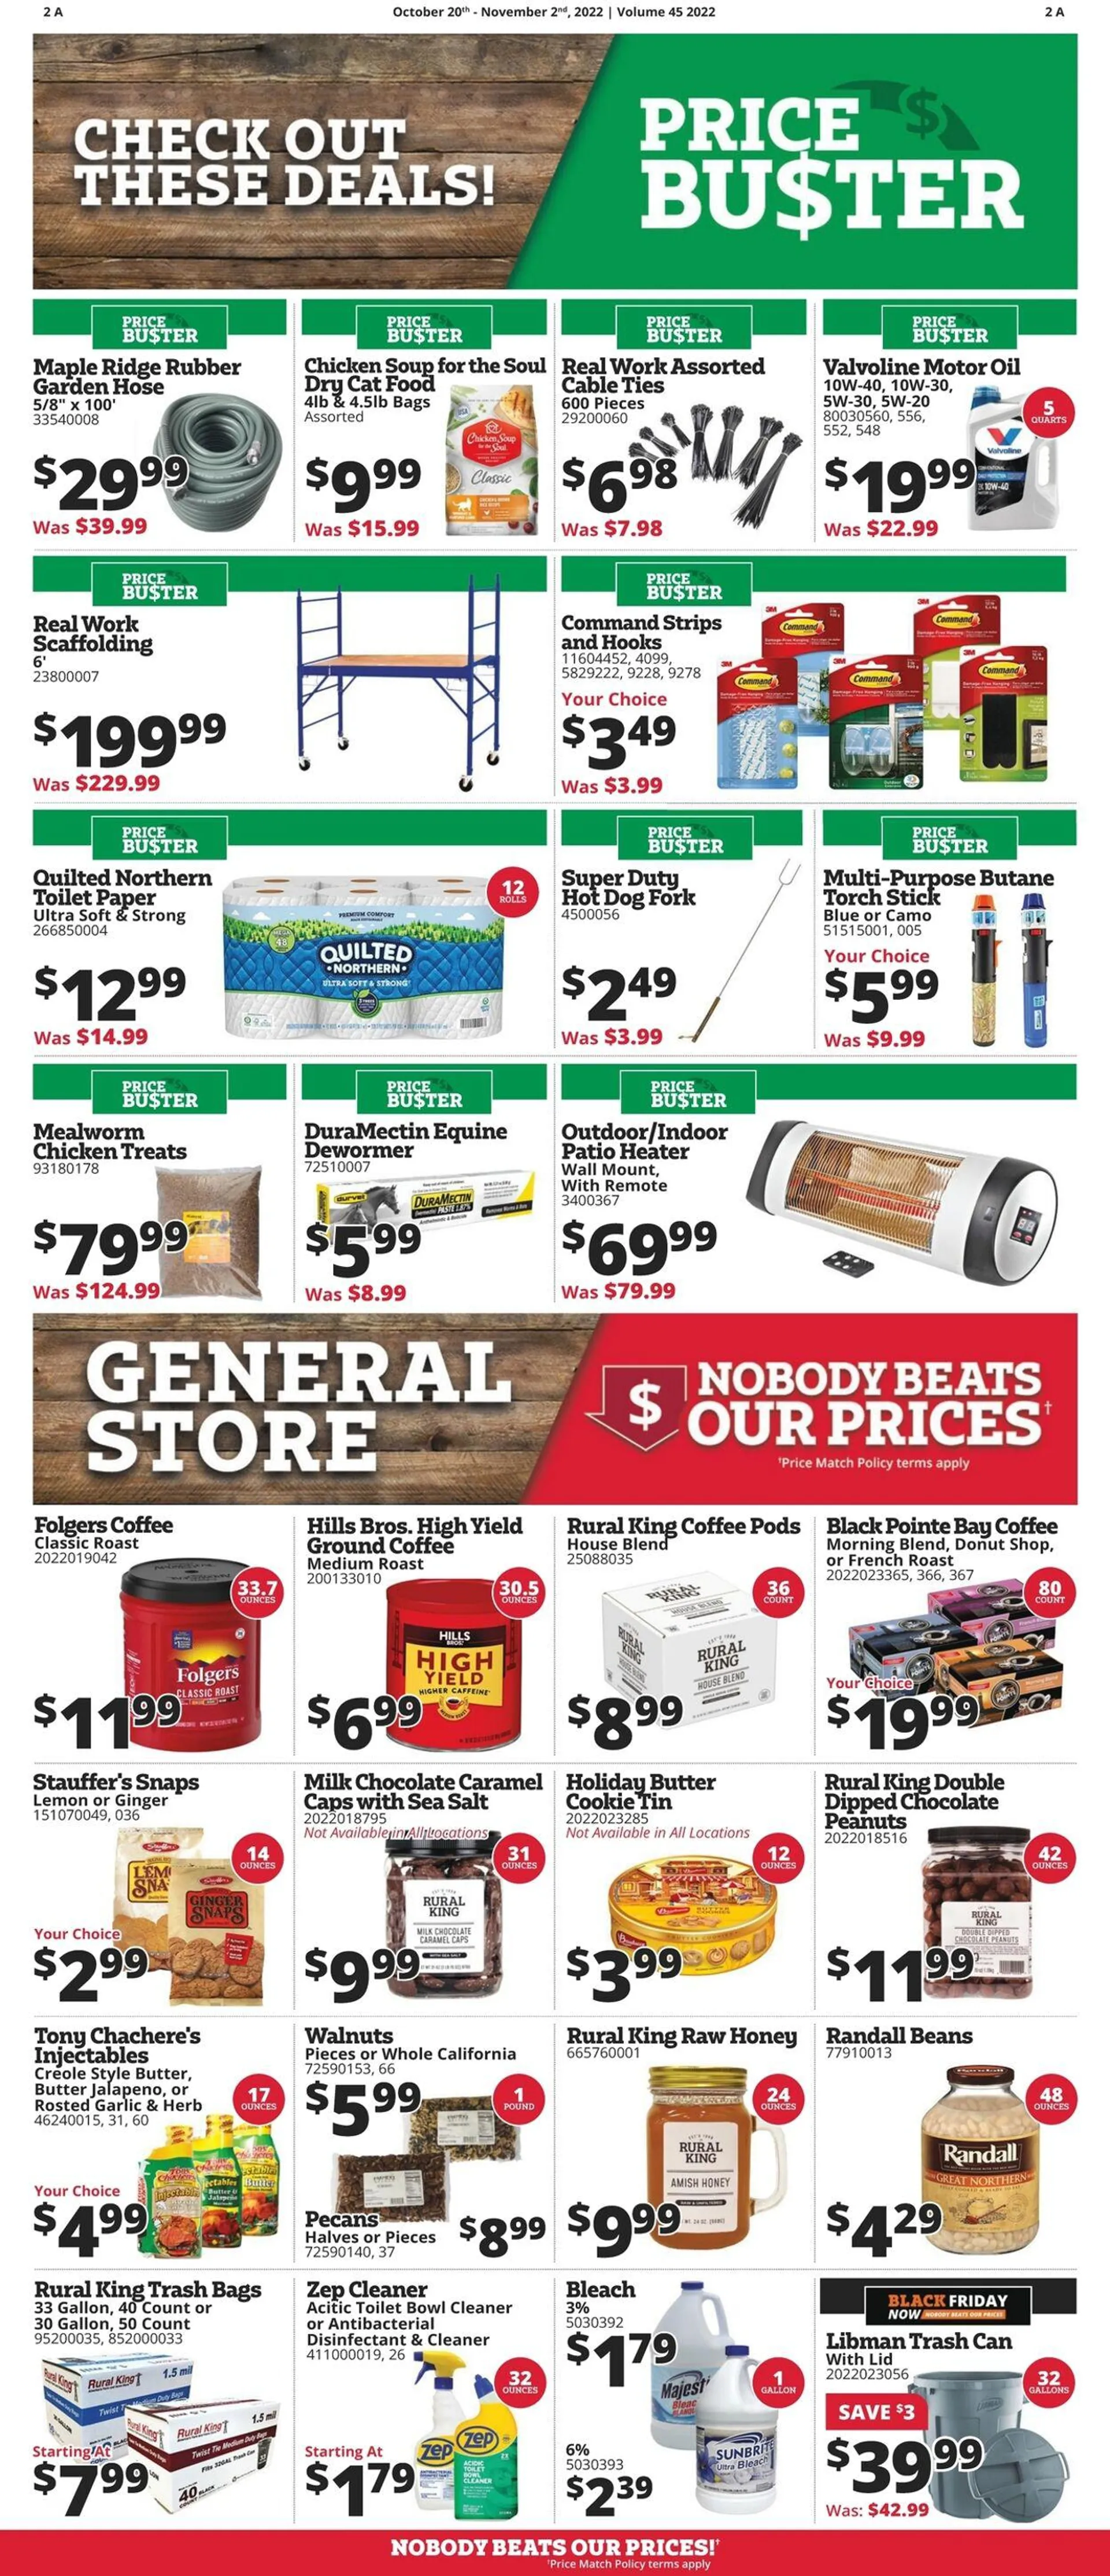 Rural King Current weekly ad - 2